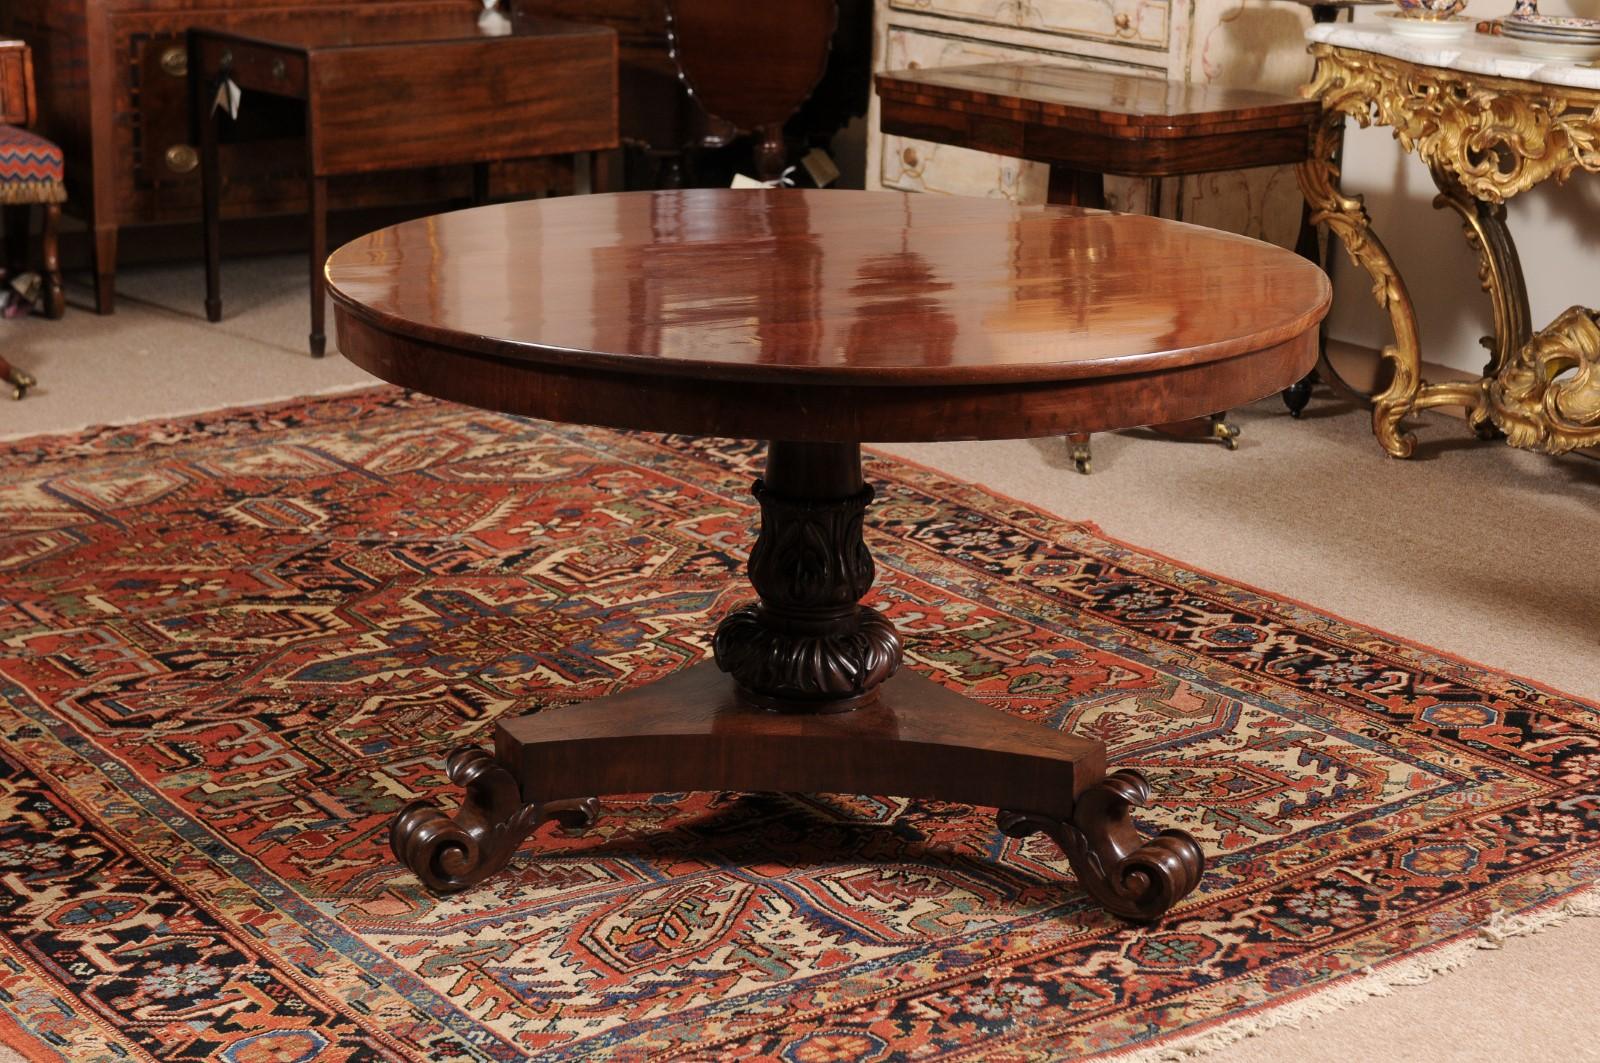  19th Century English Mahogany Center Table with Pedestal Base & Scroll Feet For Sale 11